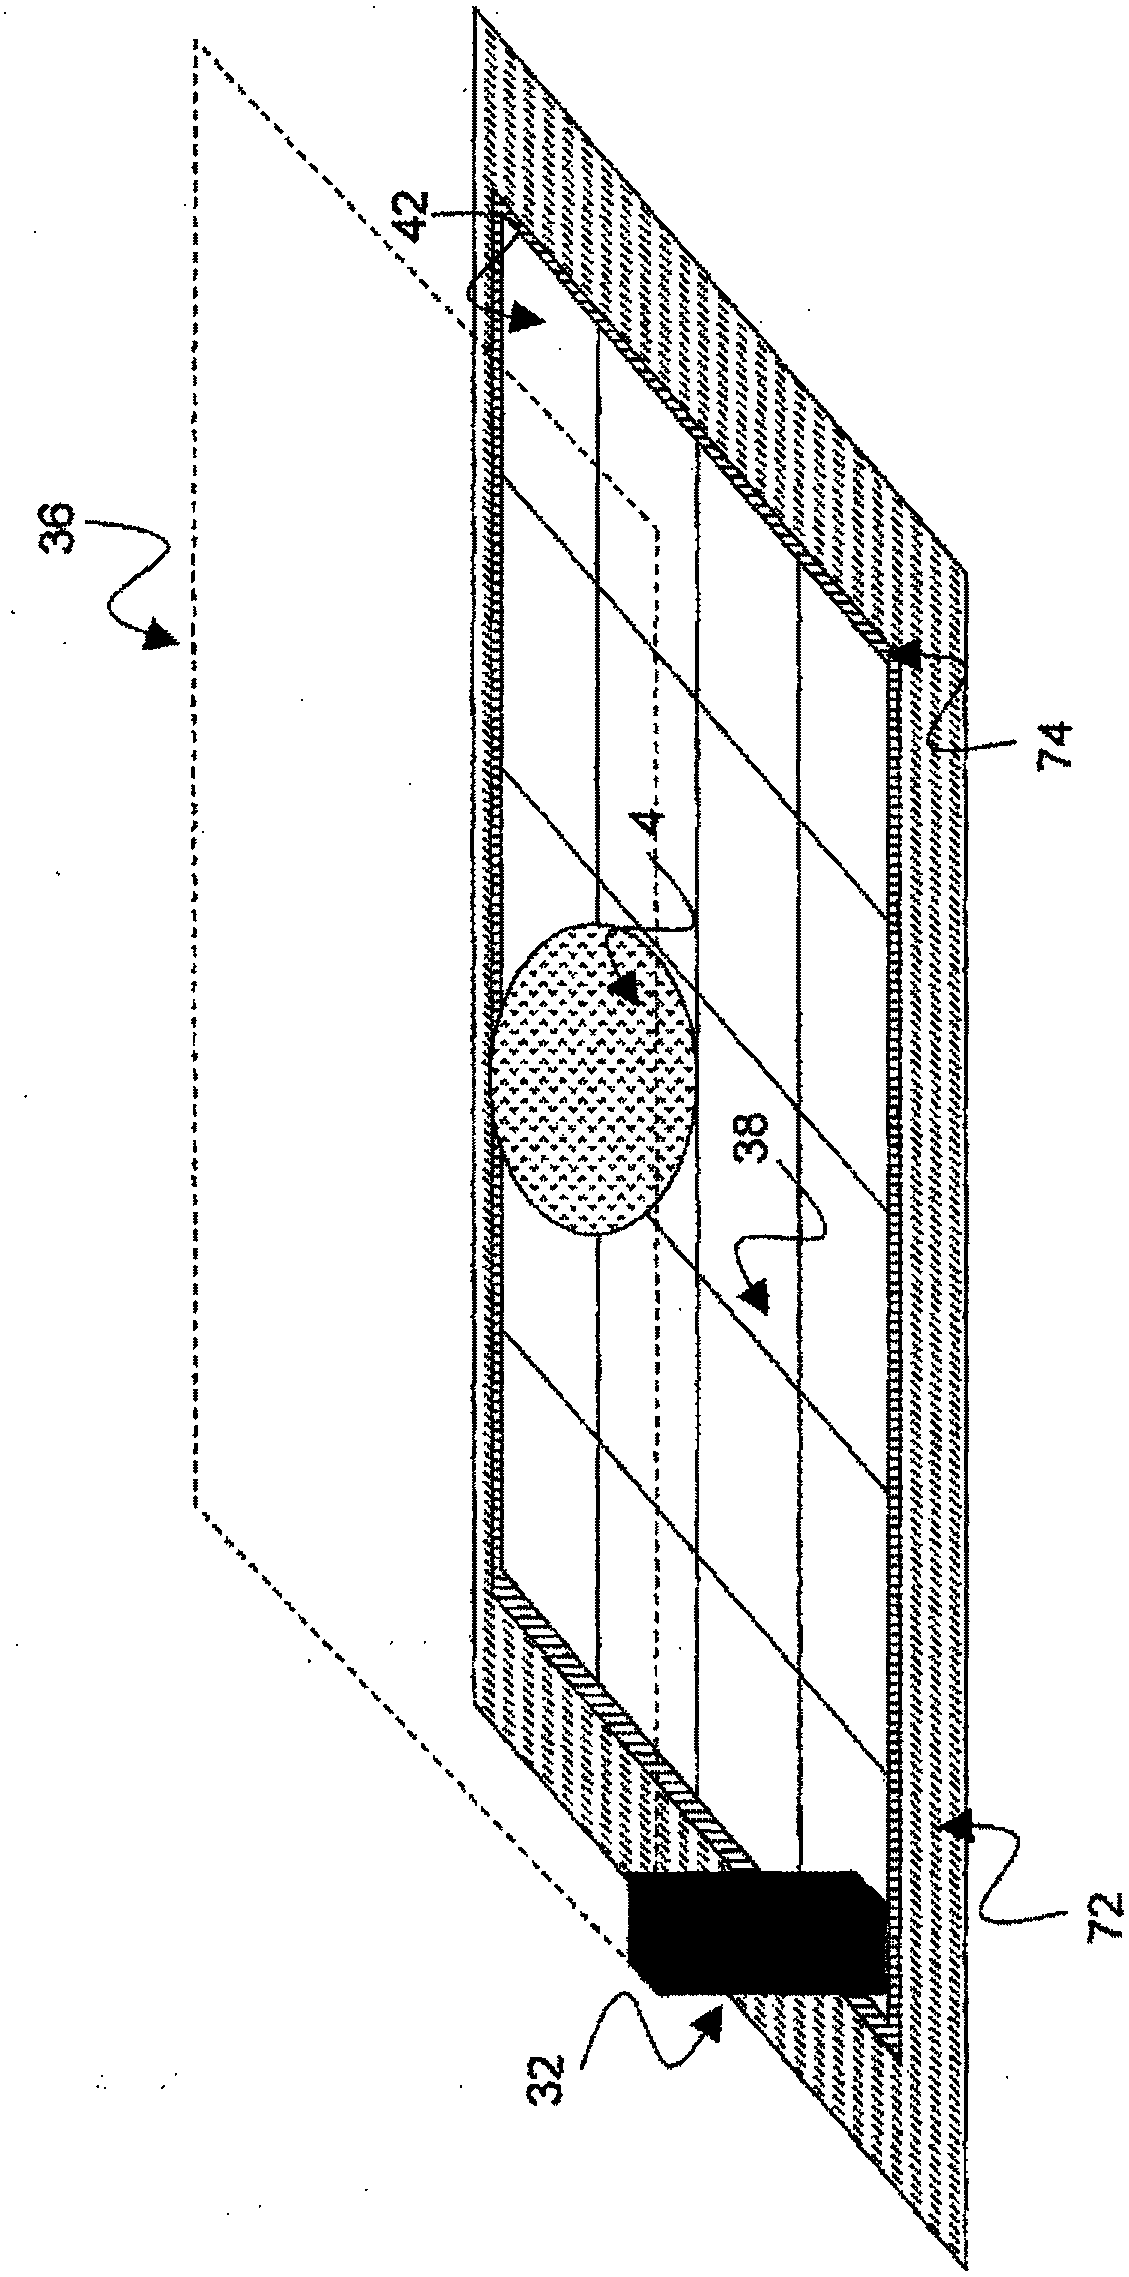 Droplet microfluidic device and methods of sensing the result of assay therein